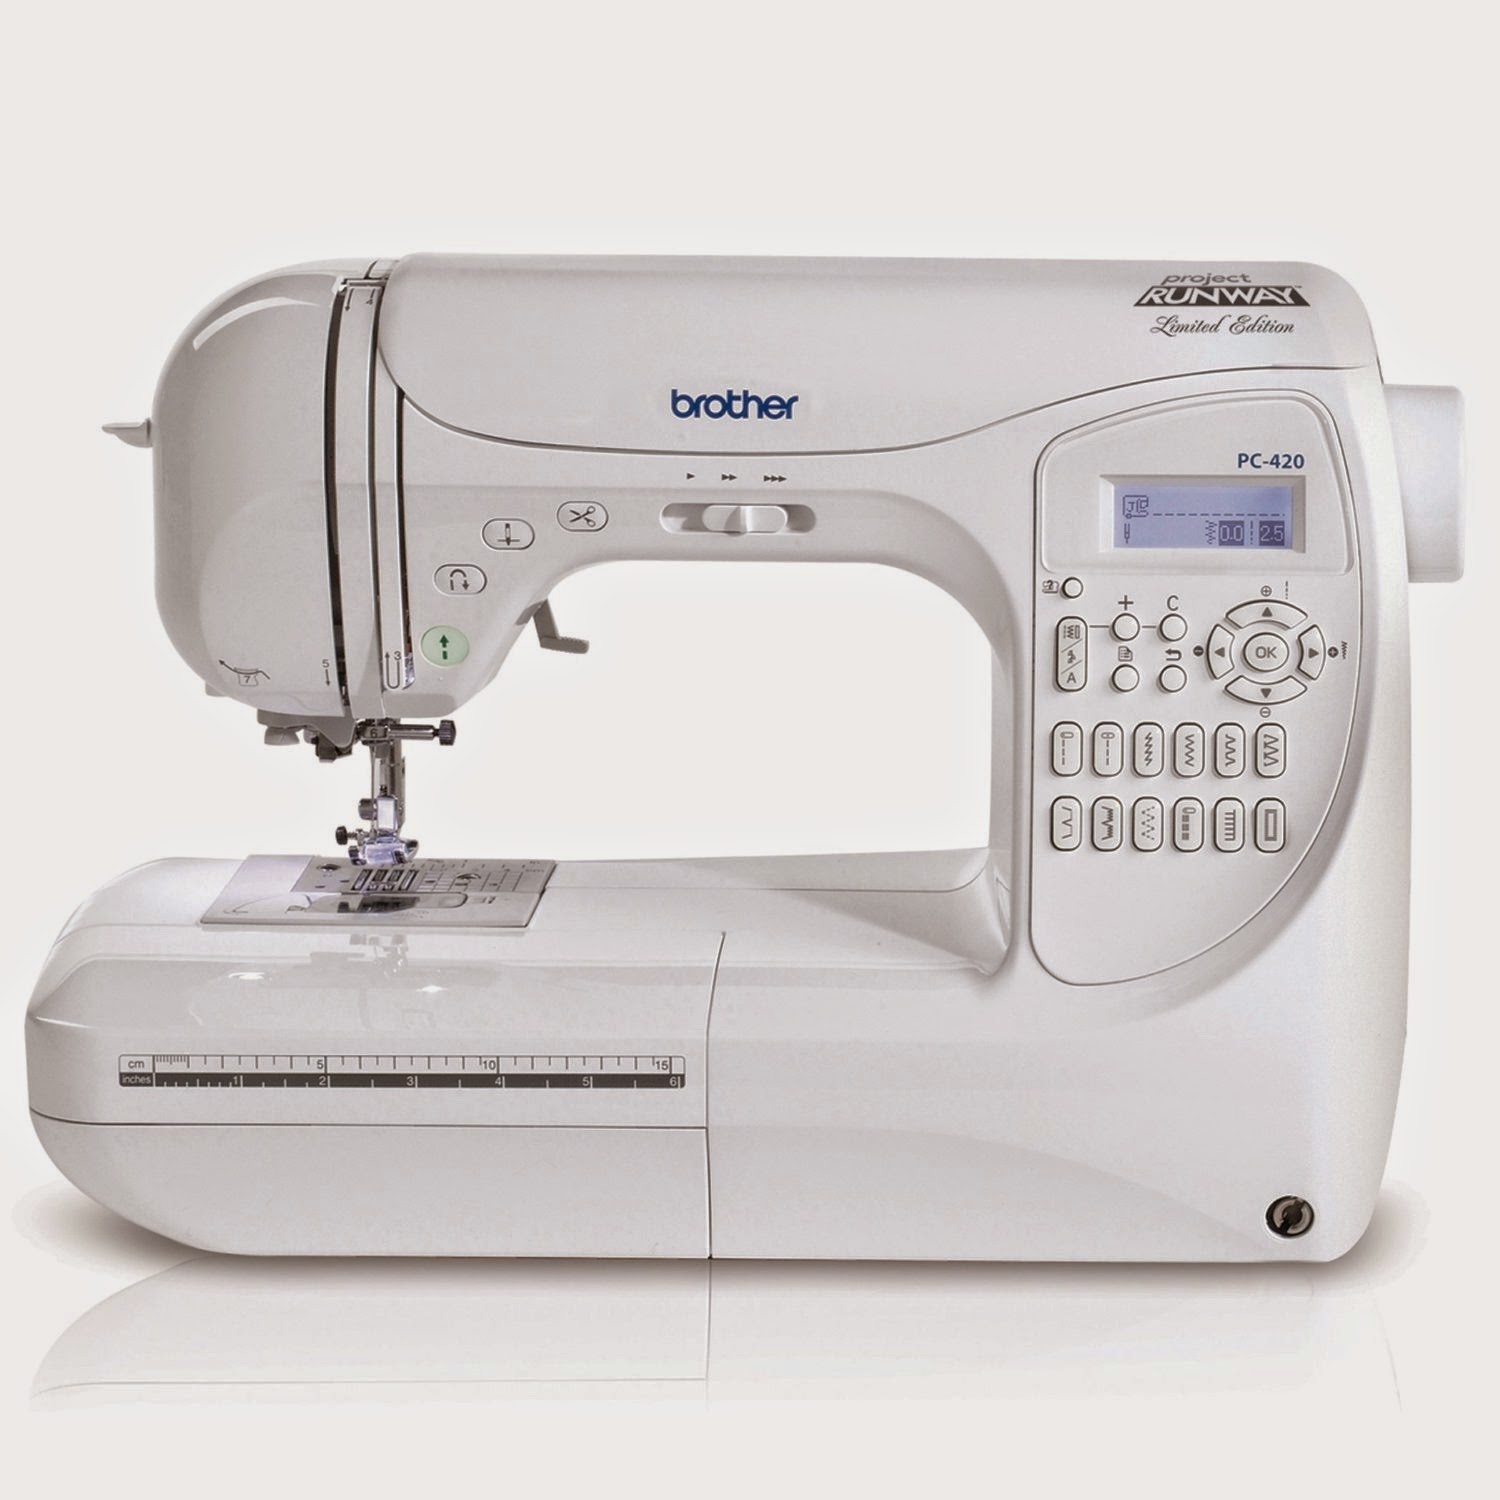 Brother PC420PRW Project Runway Computerized Sewing Machine, review, 294 built-in stitches, 10 one-step auto-size buttonholes, 3 lettering styles, custom stitch program,